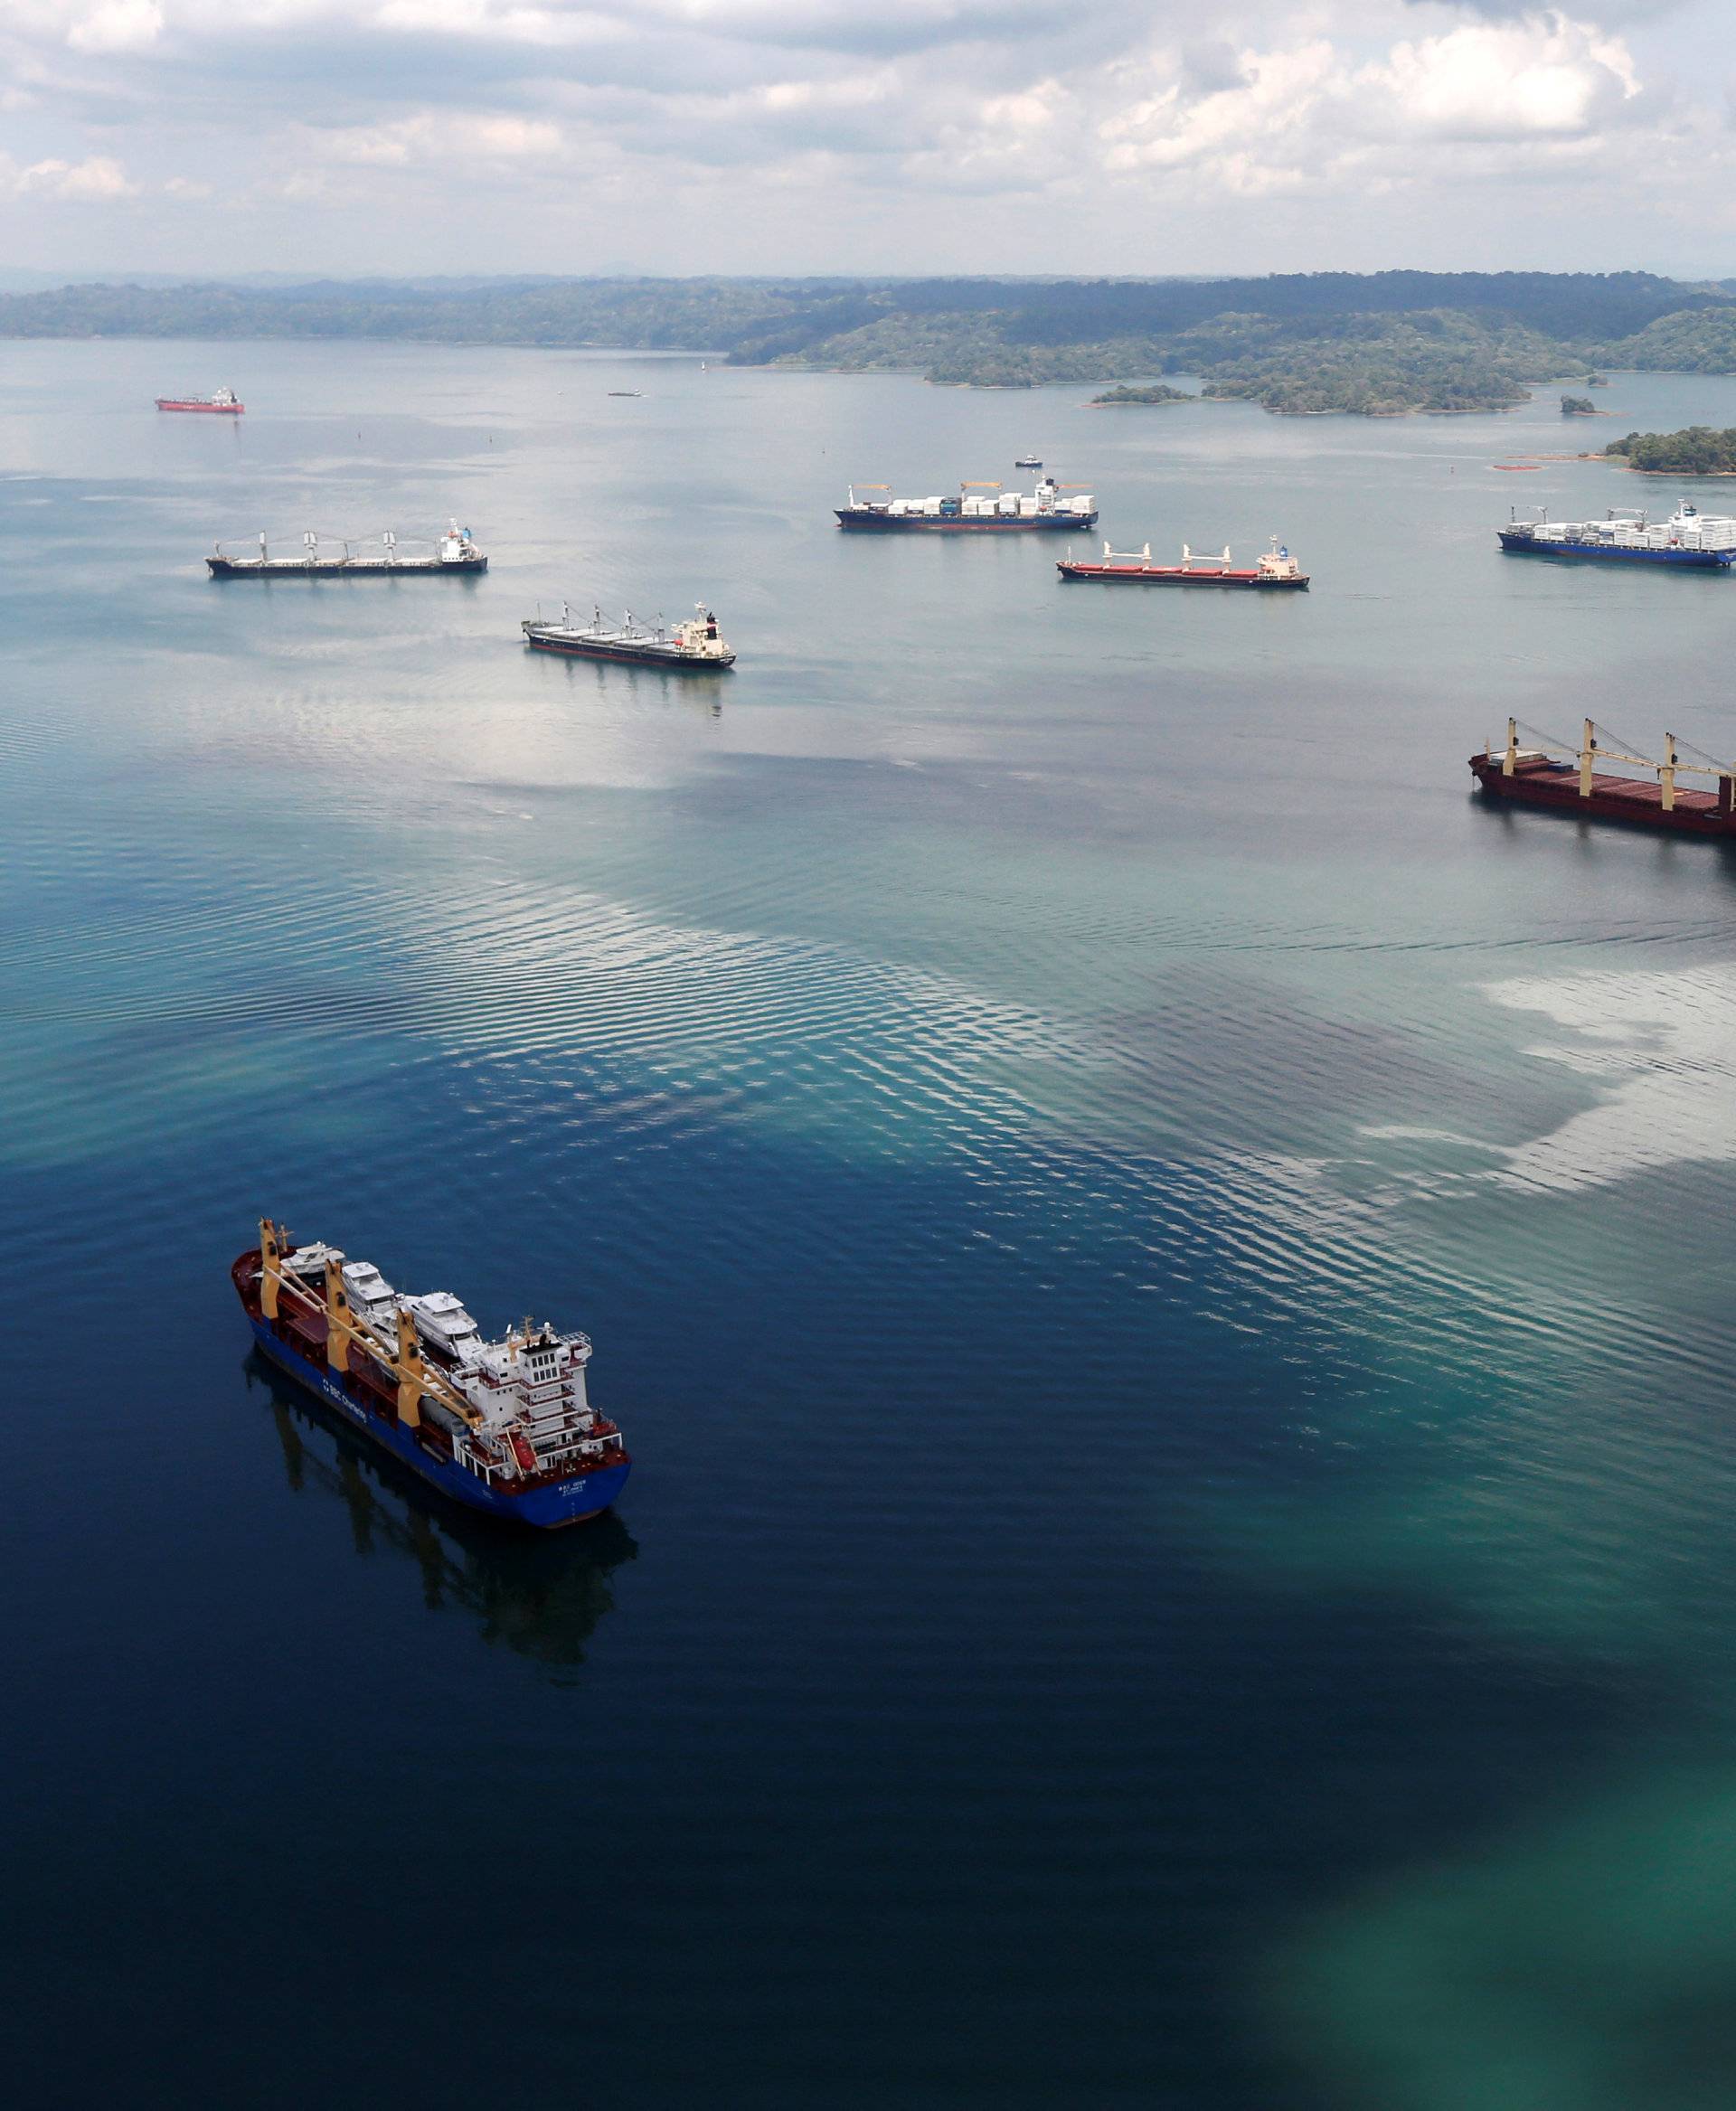 Cargo ships navigate Panama Canal during organized media tour by Italy's Salini Impregilo, on the outskirts of Colon city, Panama